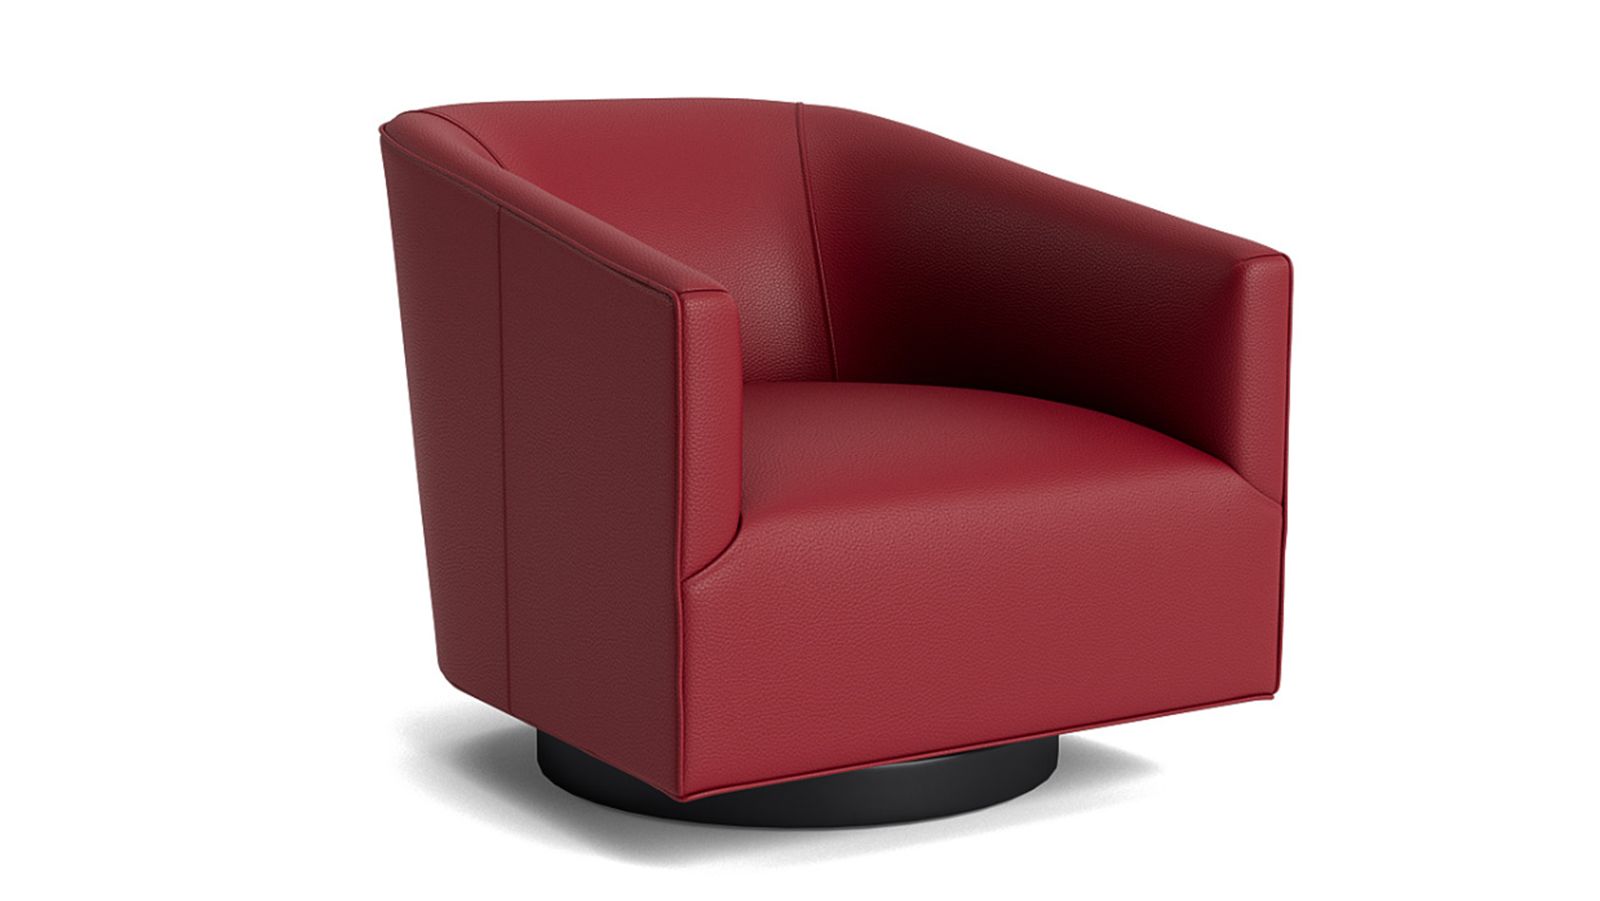 Available now: Furniture leathers in the Pantone Color of the Year